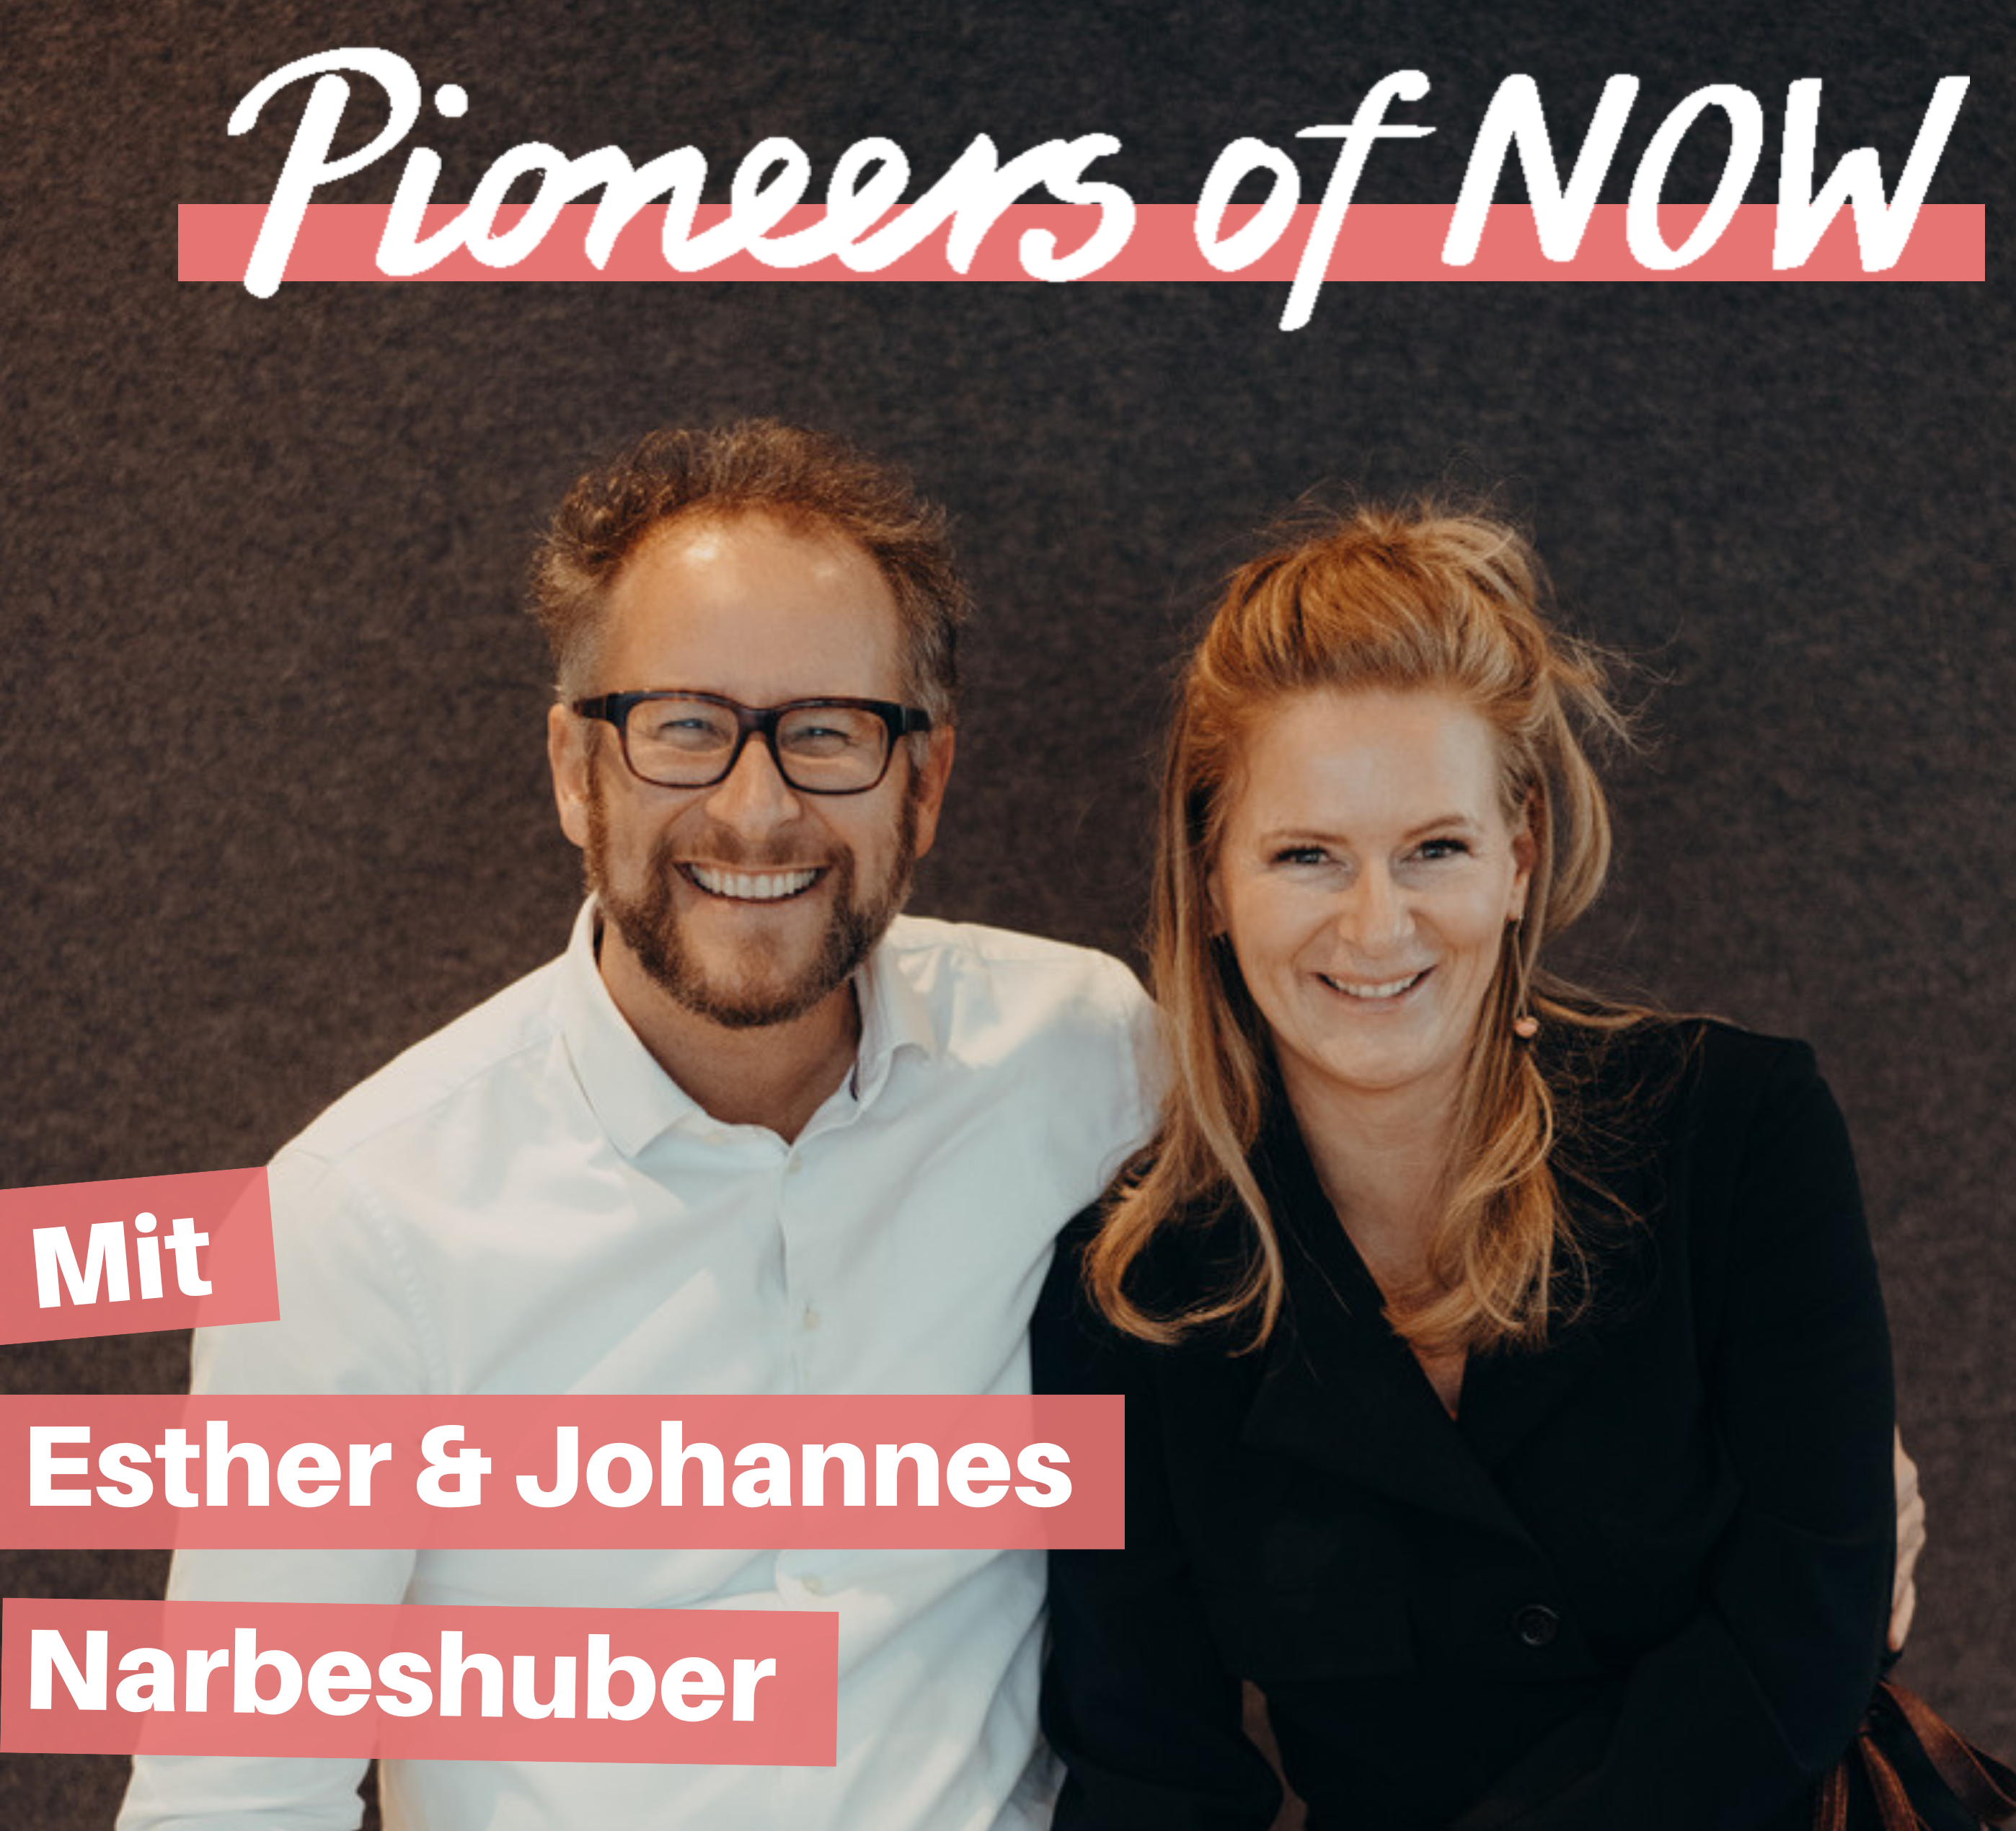 Podcast Cover Pioneers of NOW (1)_1